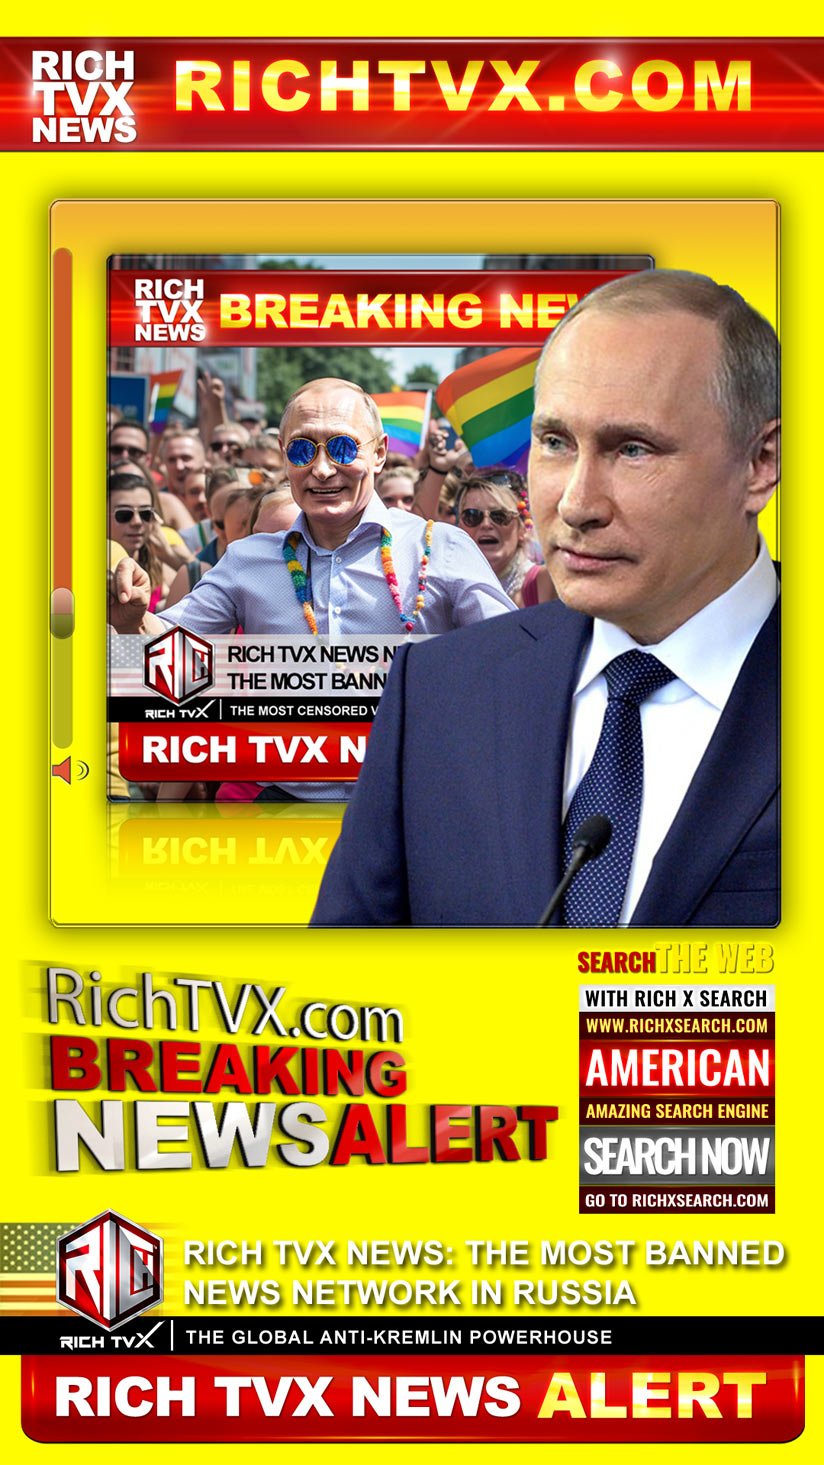 How Rich TVX News Network Became the Most Banned News Channel in Russia